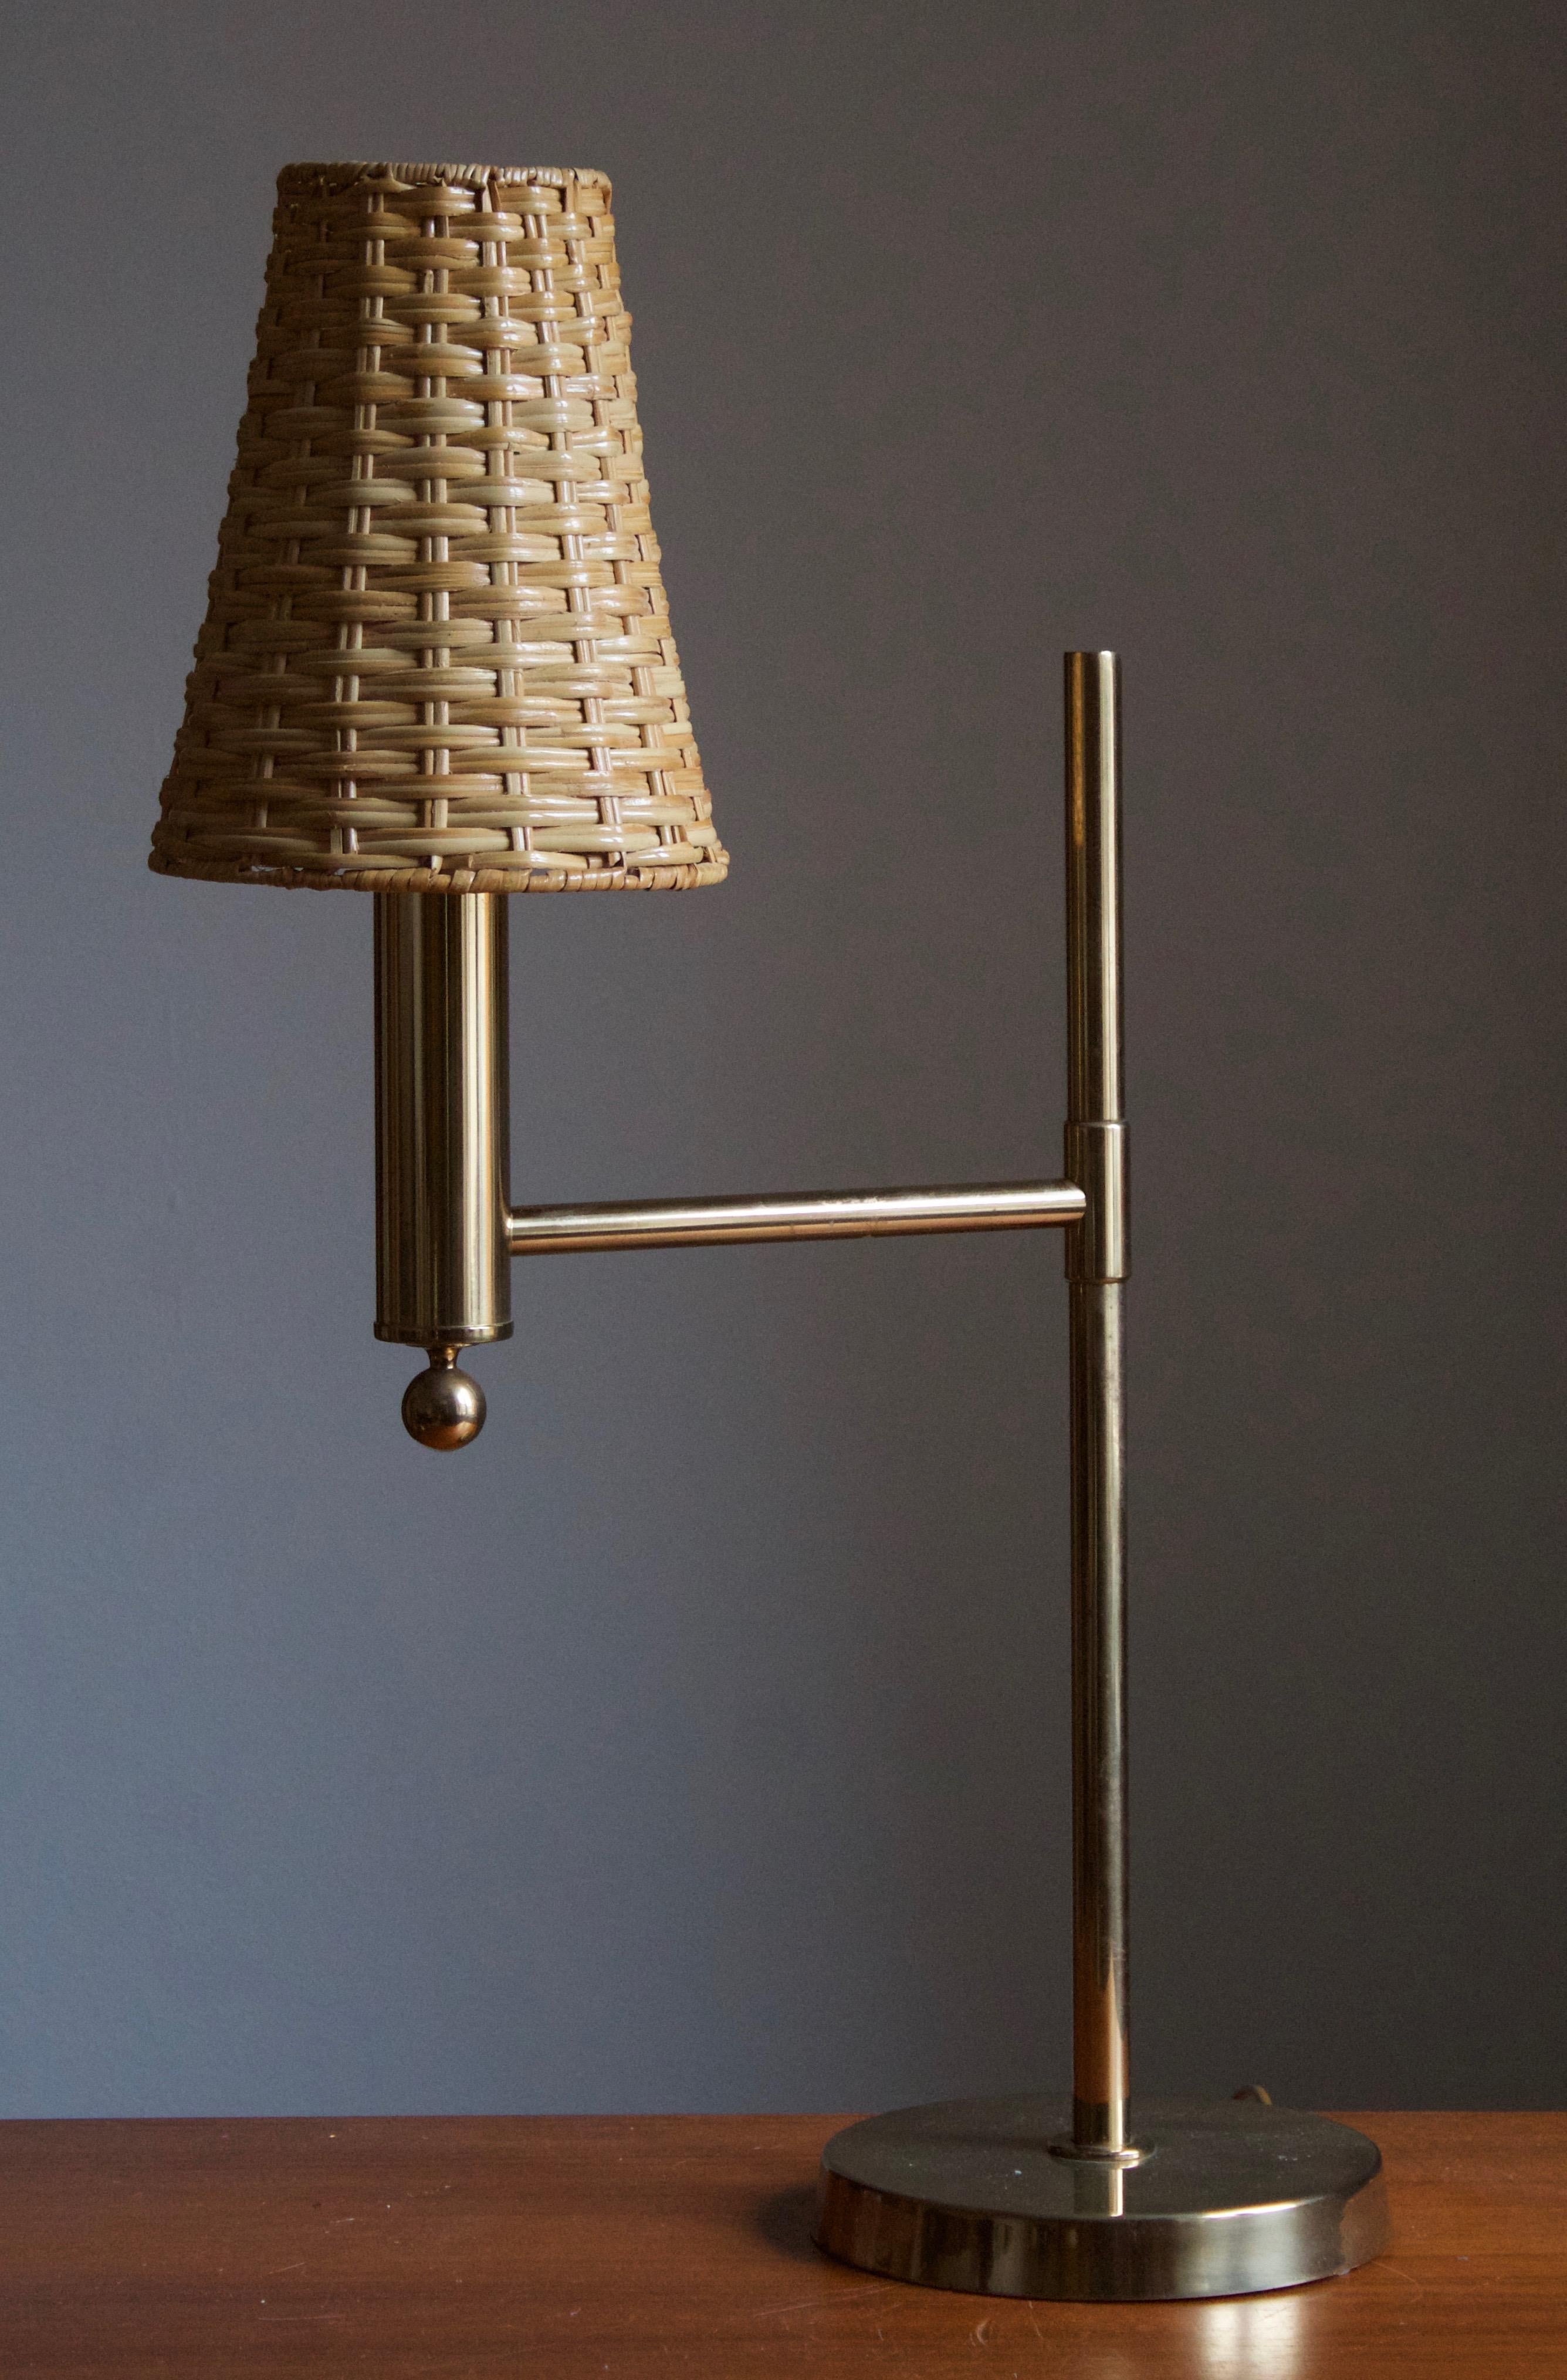 A sizable table lamp. Designed and produced by Bergboms, Sweden, c. 1970s. With an assorted rattan lampshade.

Other designers of the period include Paavo Tynell, Hans Bergström, Josef Frank, and Kaare Klint.